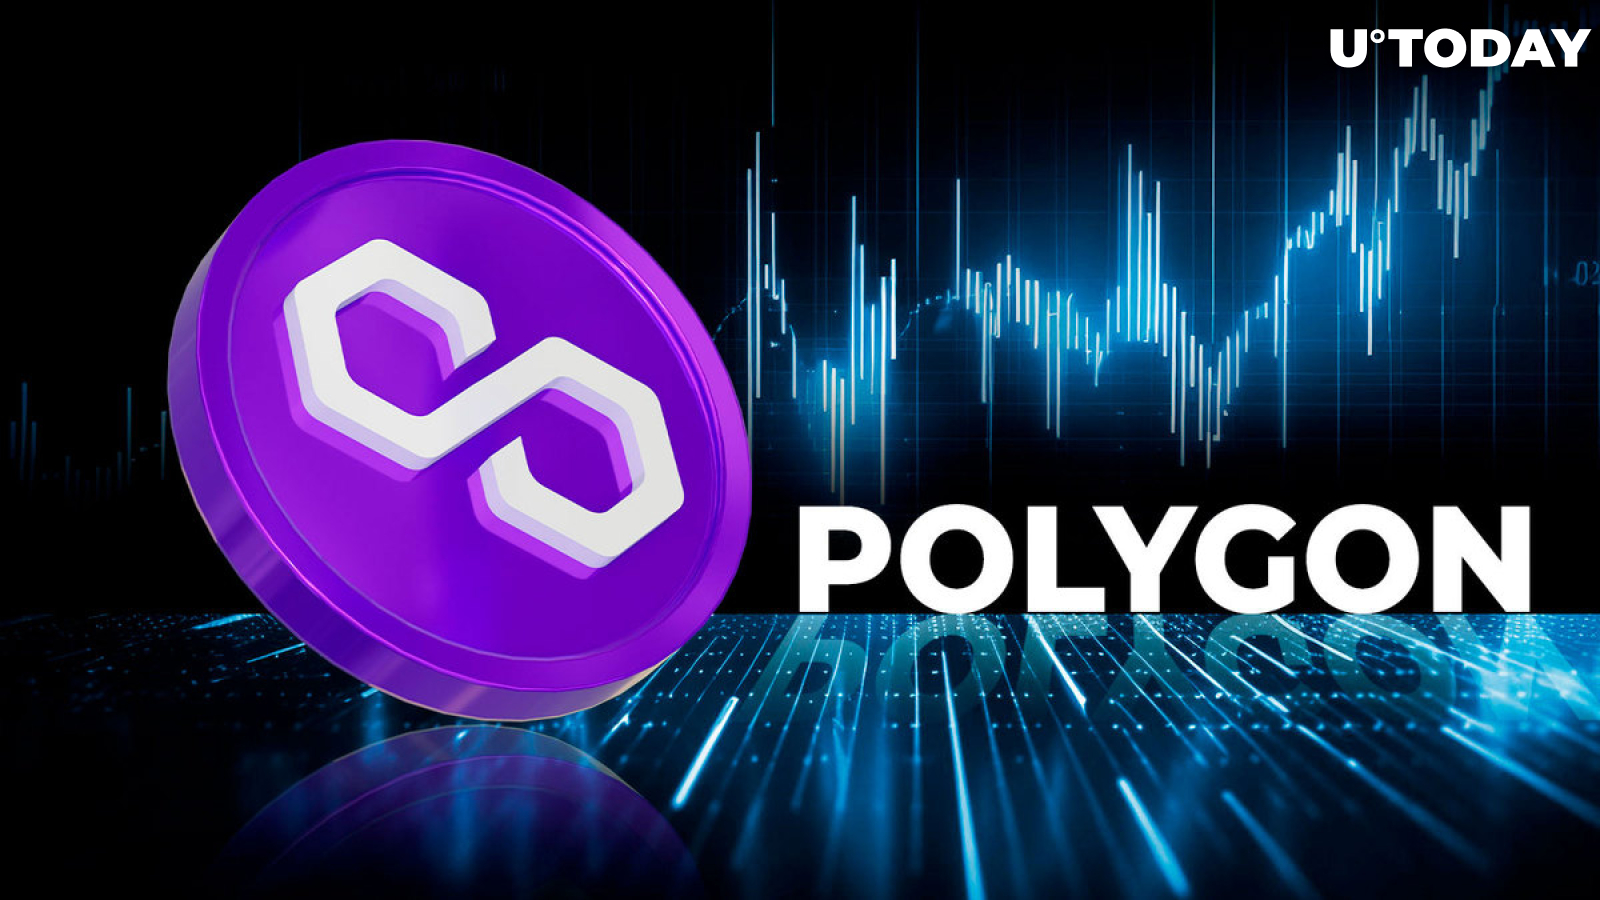 Polygon (MATIC) Price up 10%, See Reason Behind It